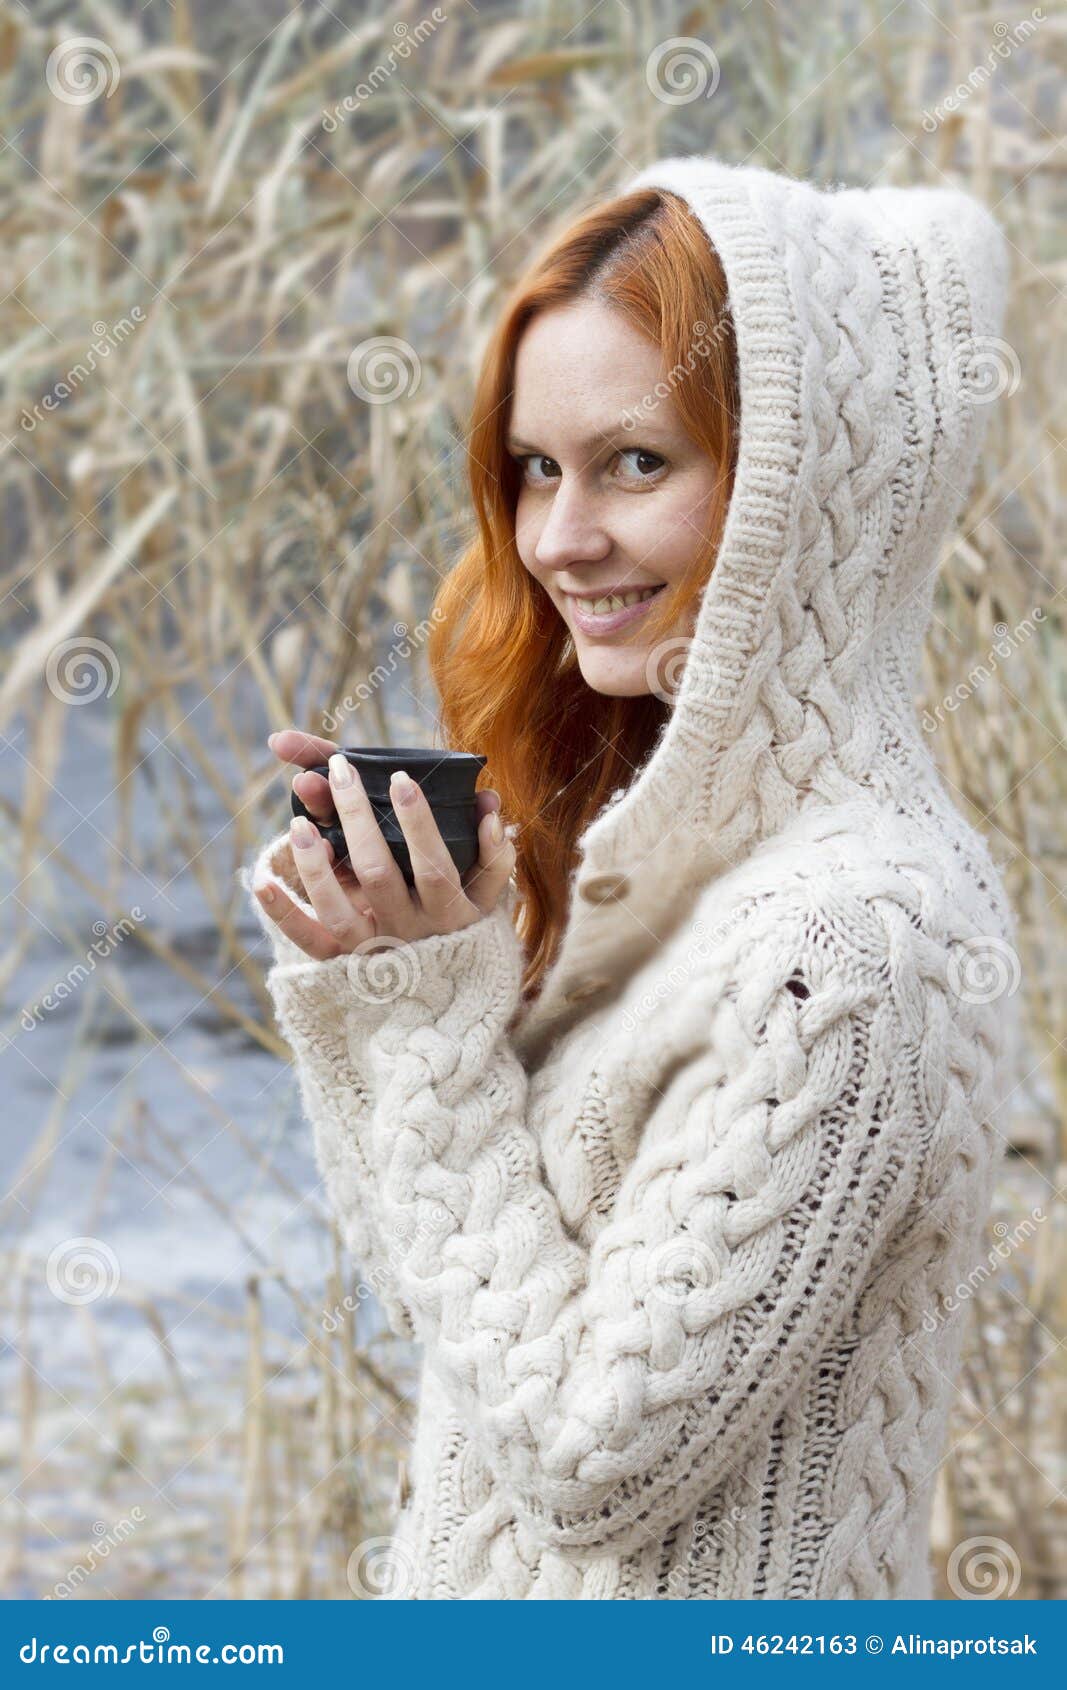 Young Girl in Warm Sweater Drinking a Cup of Hot Drink Stock Image ...